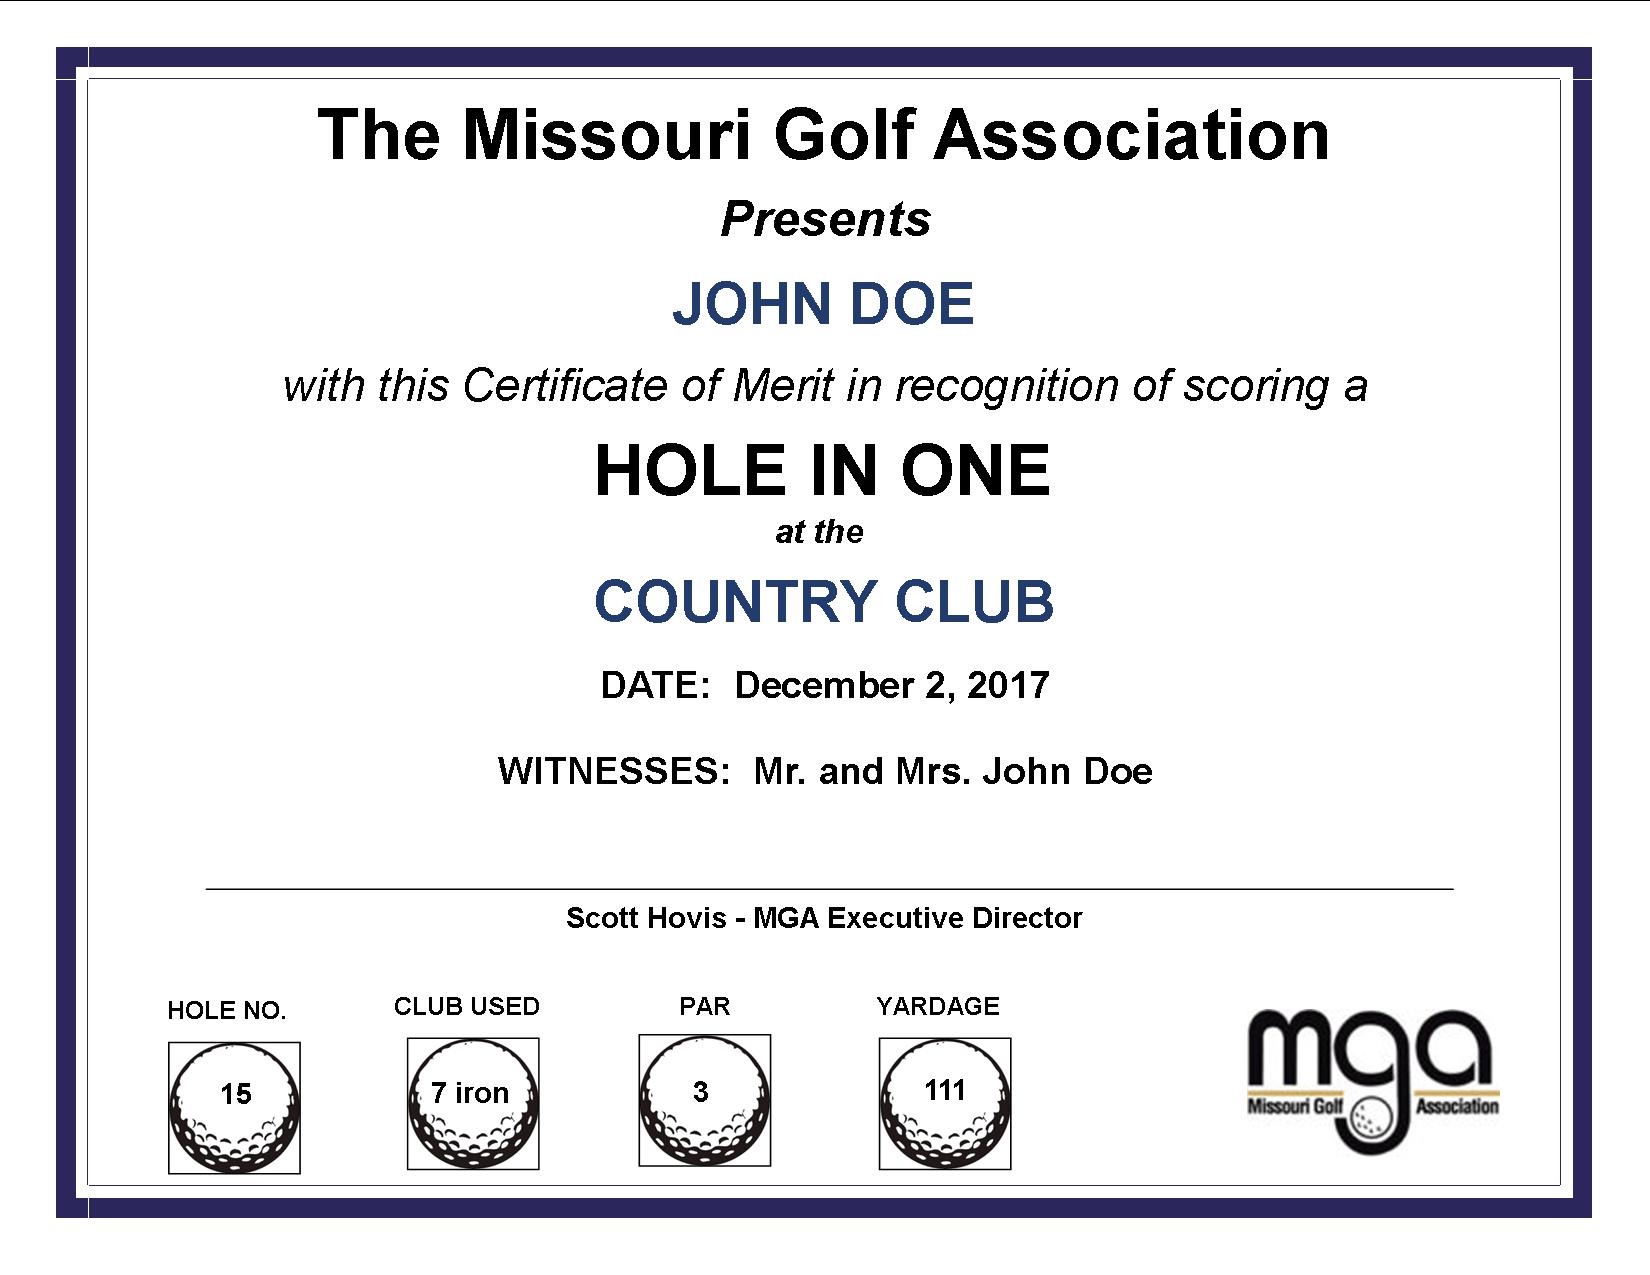 report-a-hole-in-one-missouri-golf-association